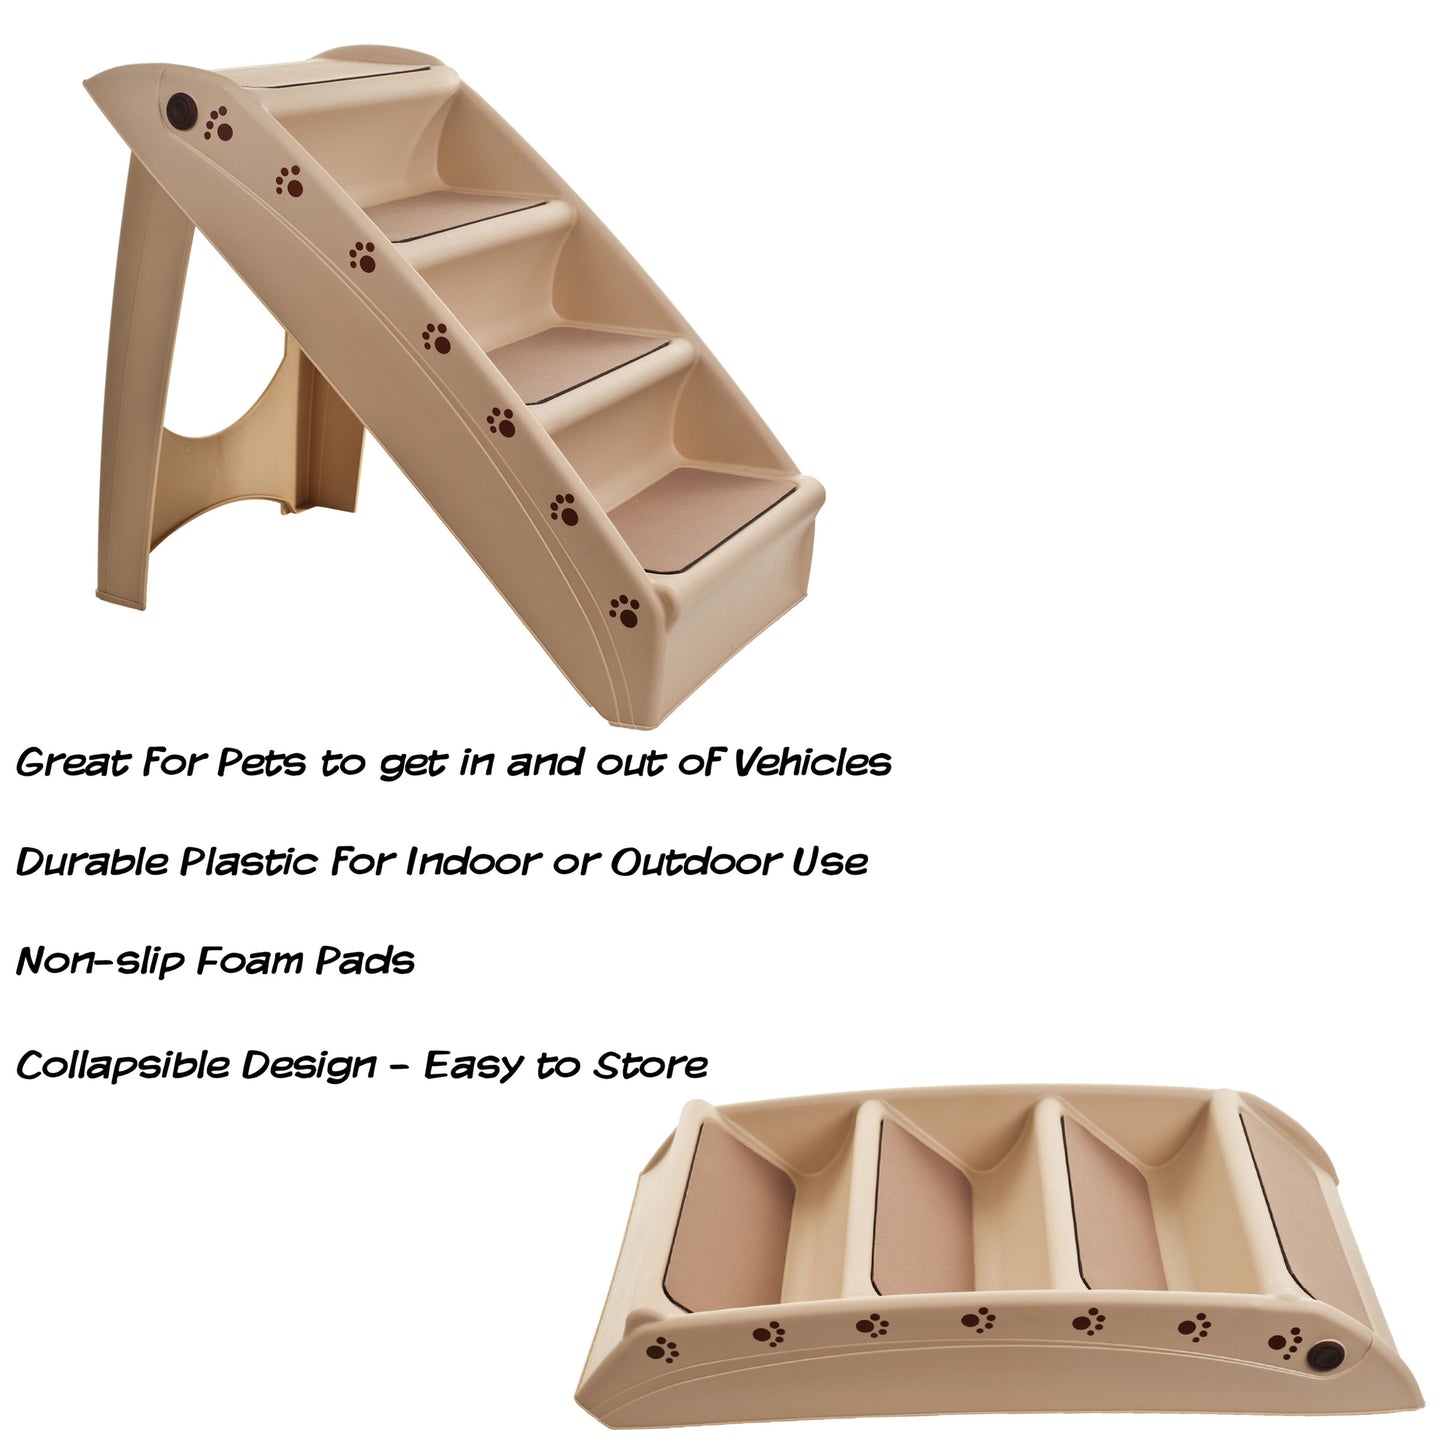 Foldable 4-Step Nonslip Pet Stairs